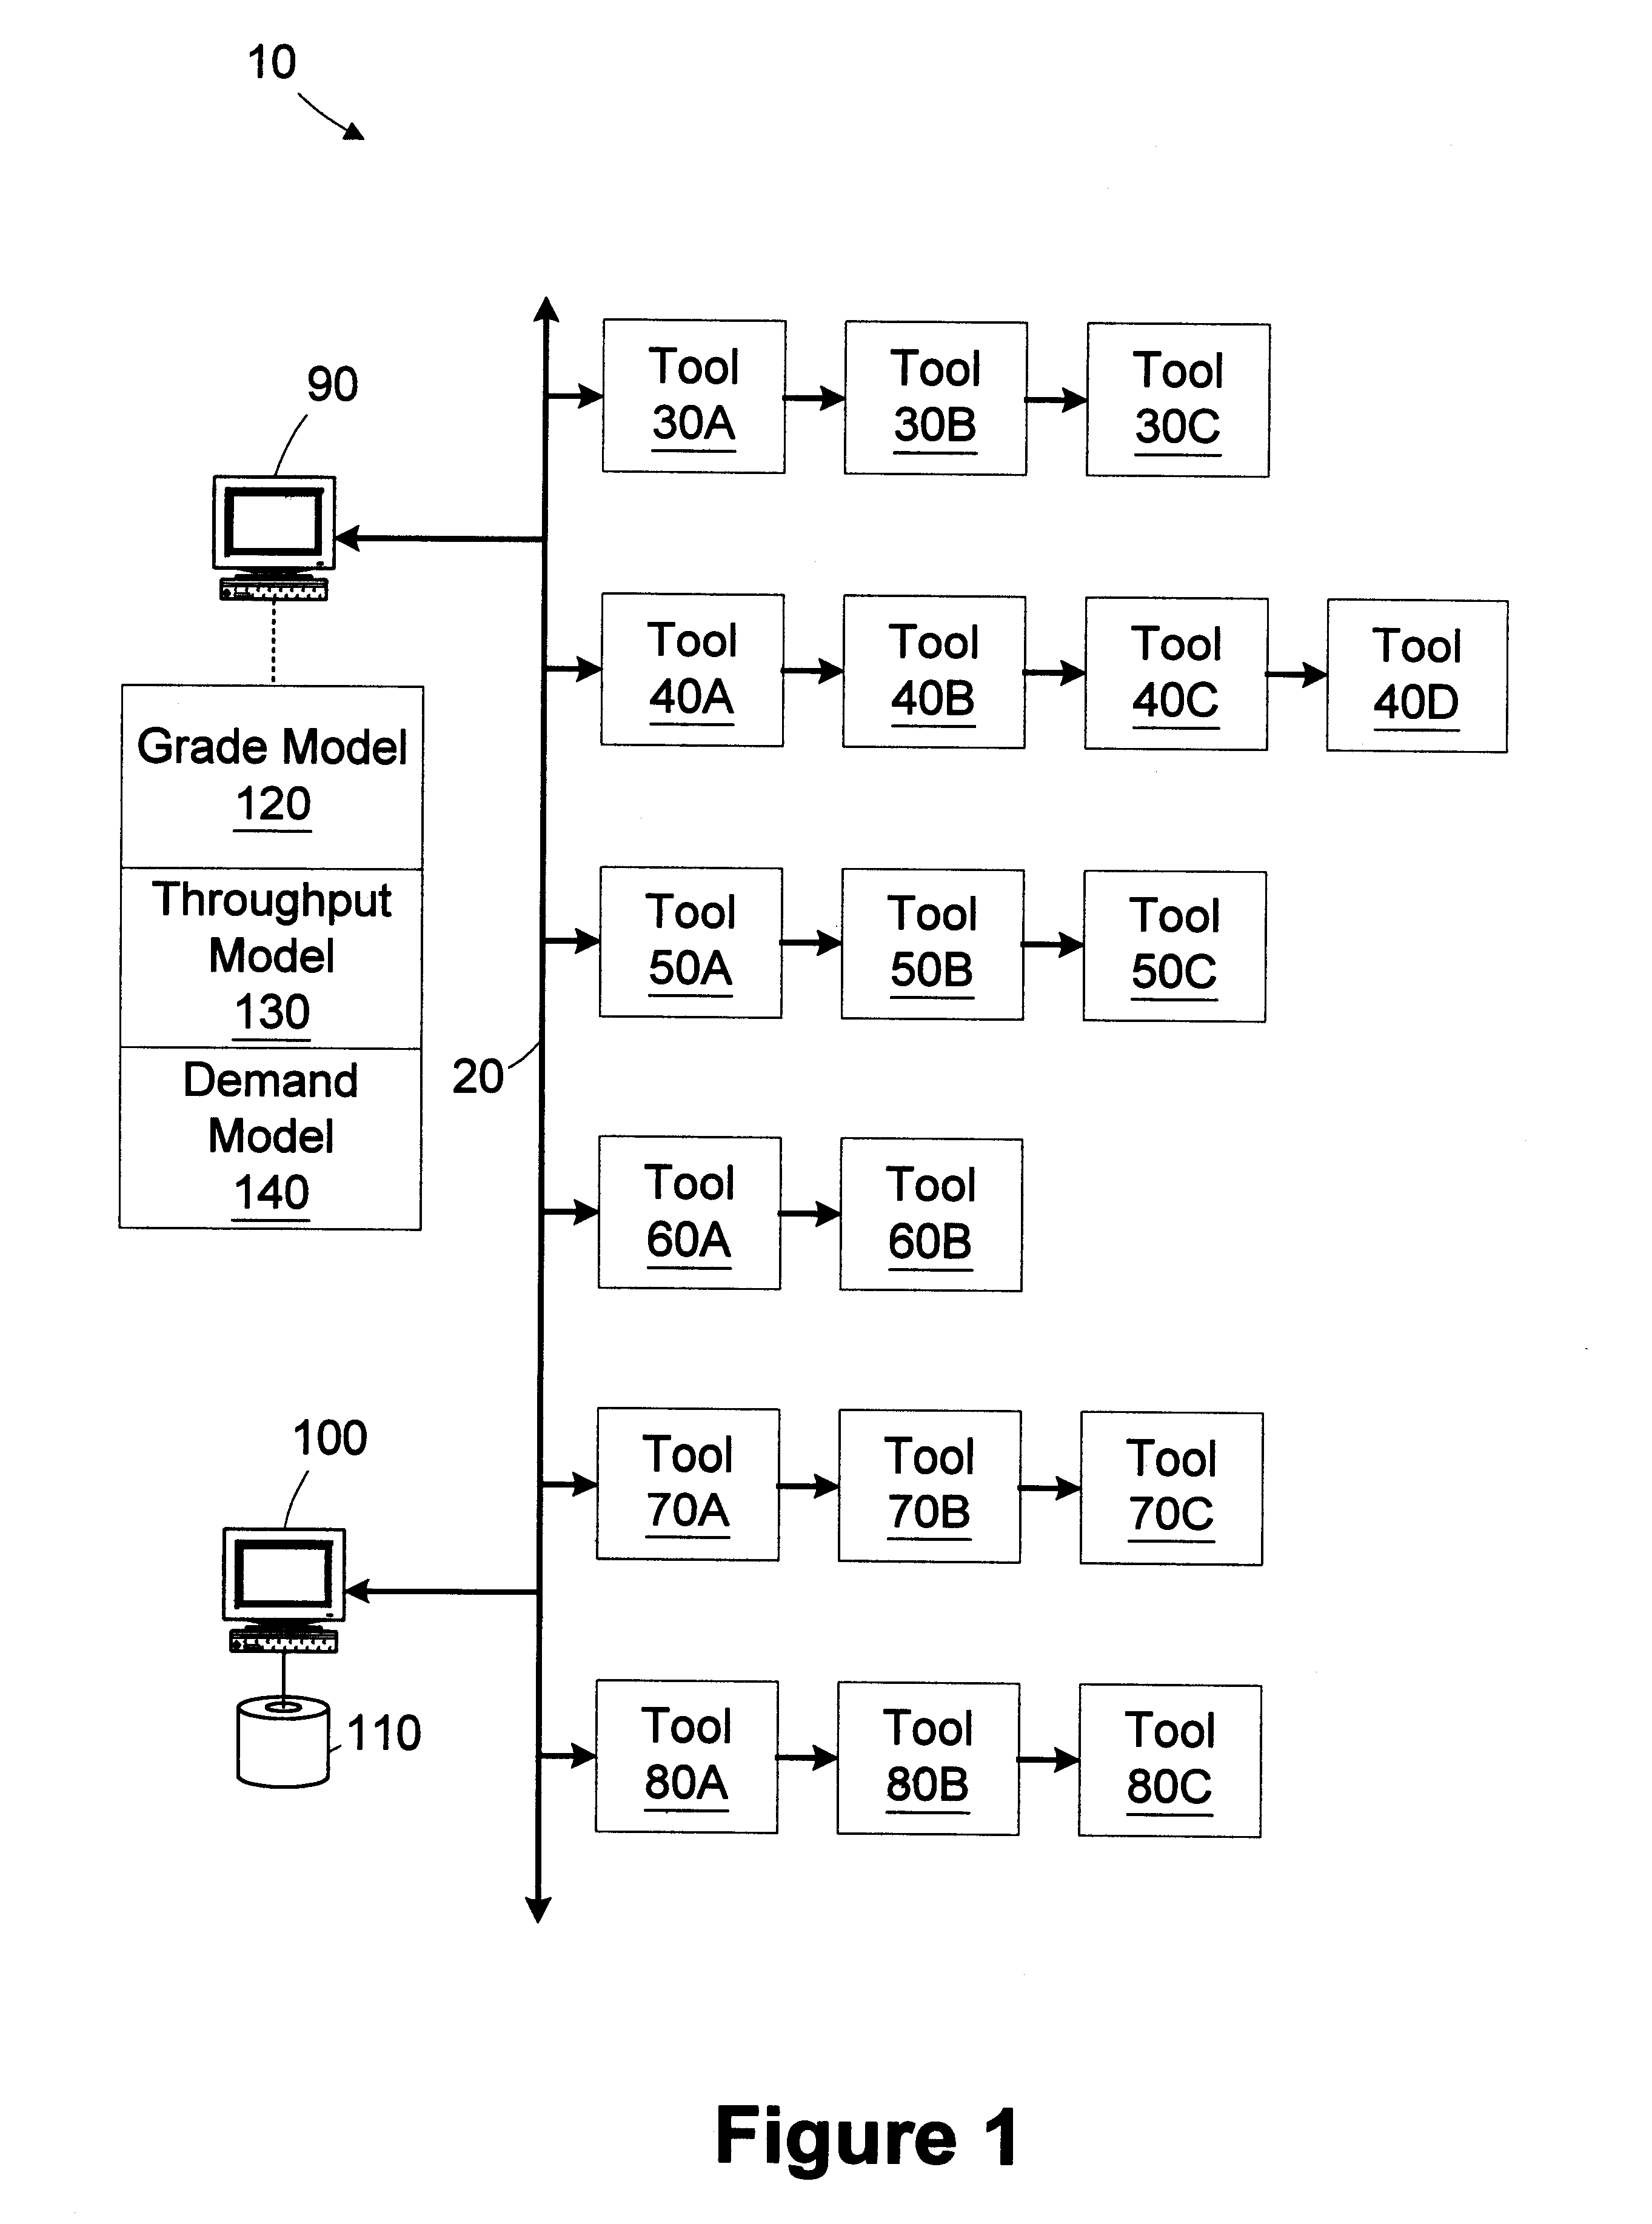 Method for prioritizing production lots based on grade estimates and output requirements